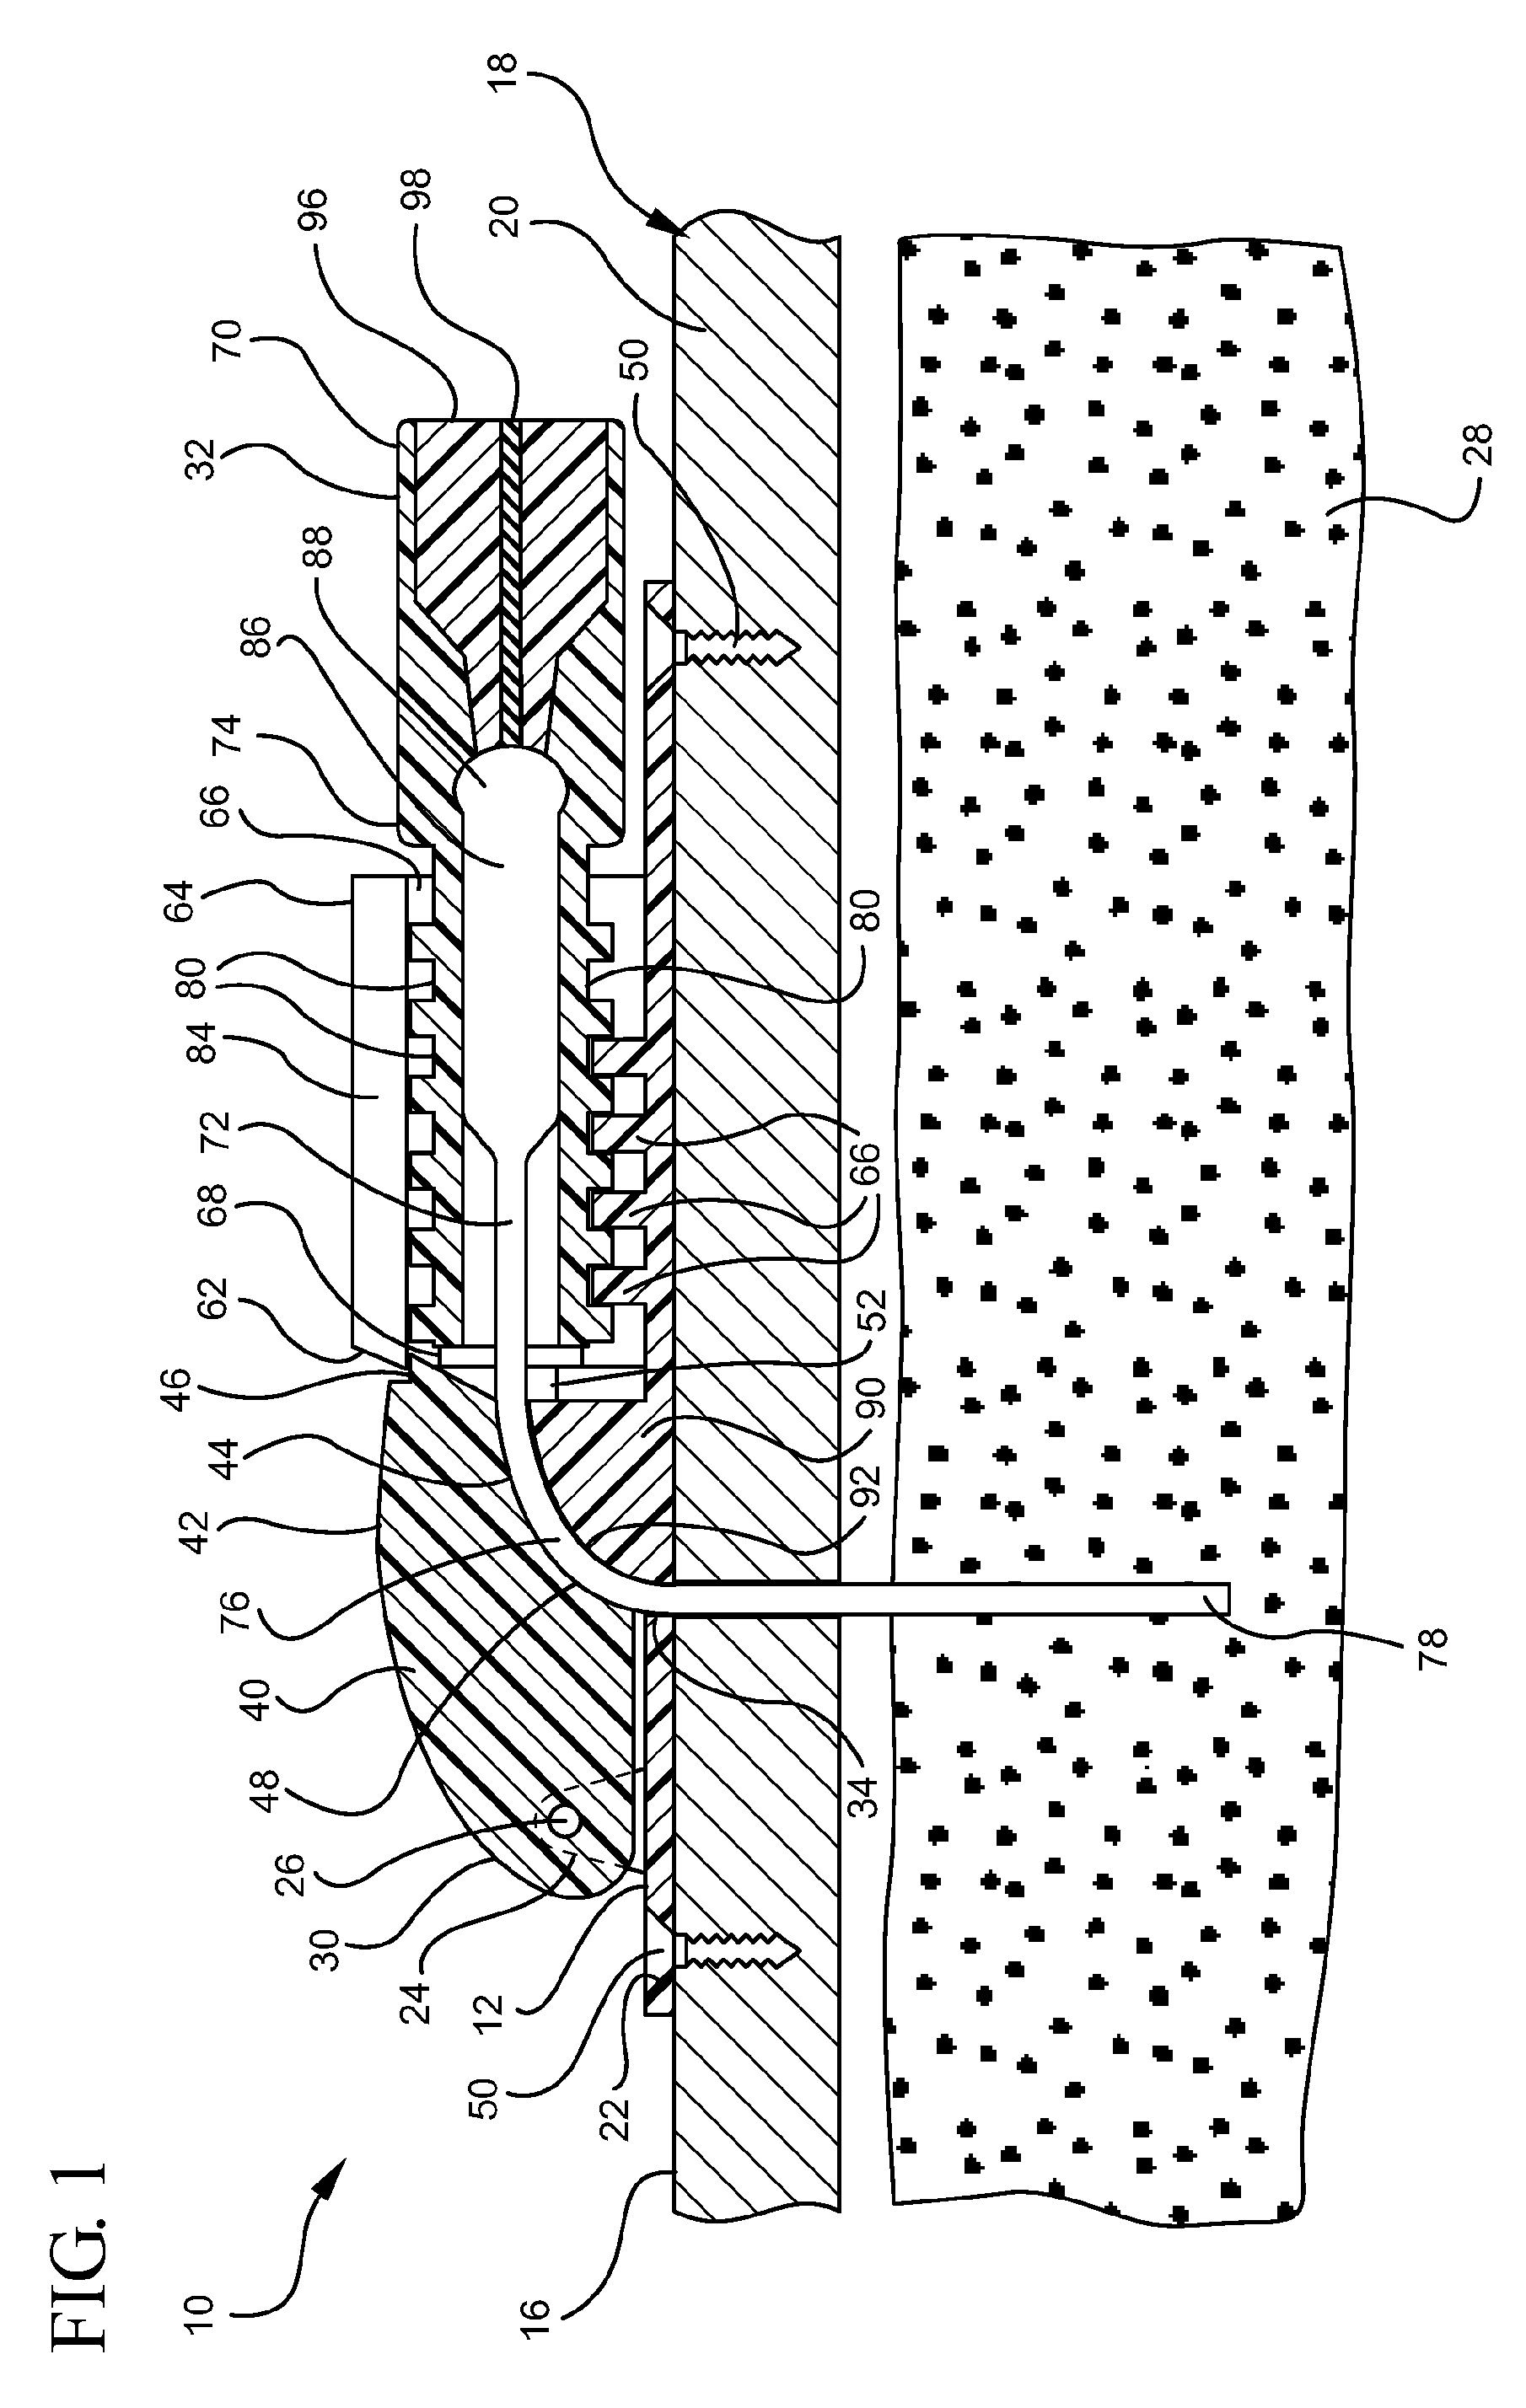 Systems and methods for providing a convection-enhanced delivery device